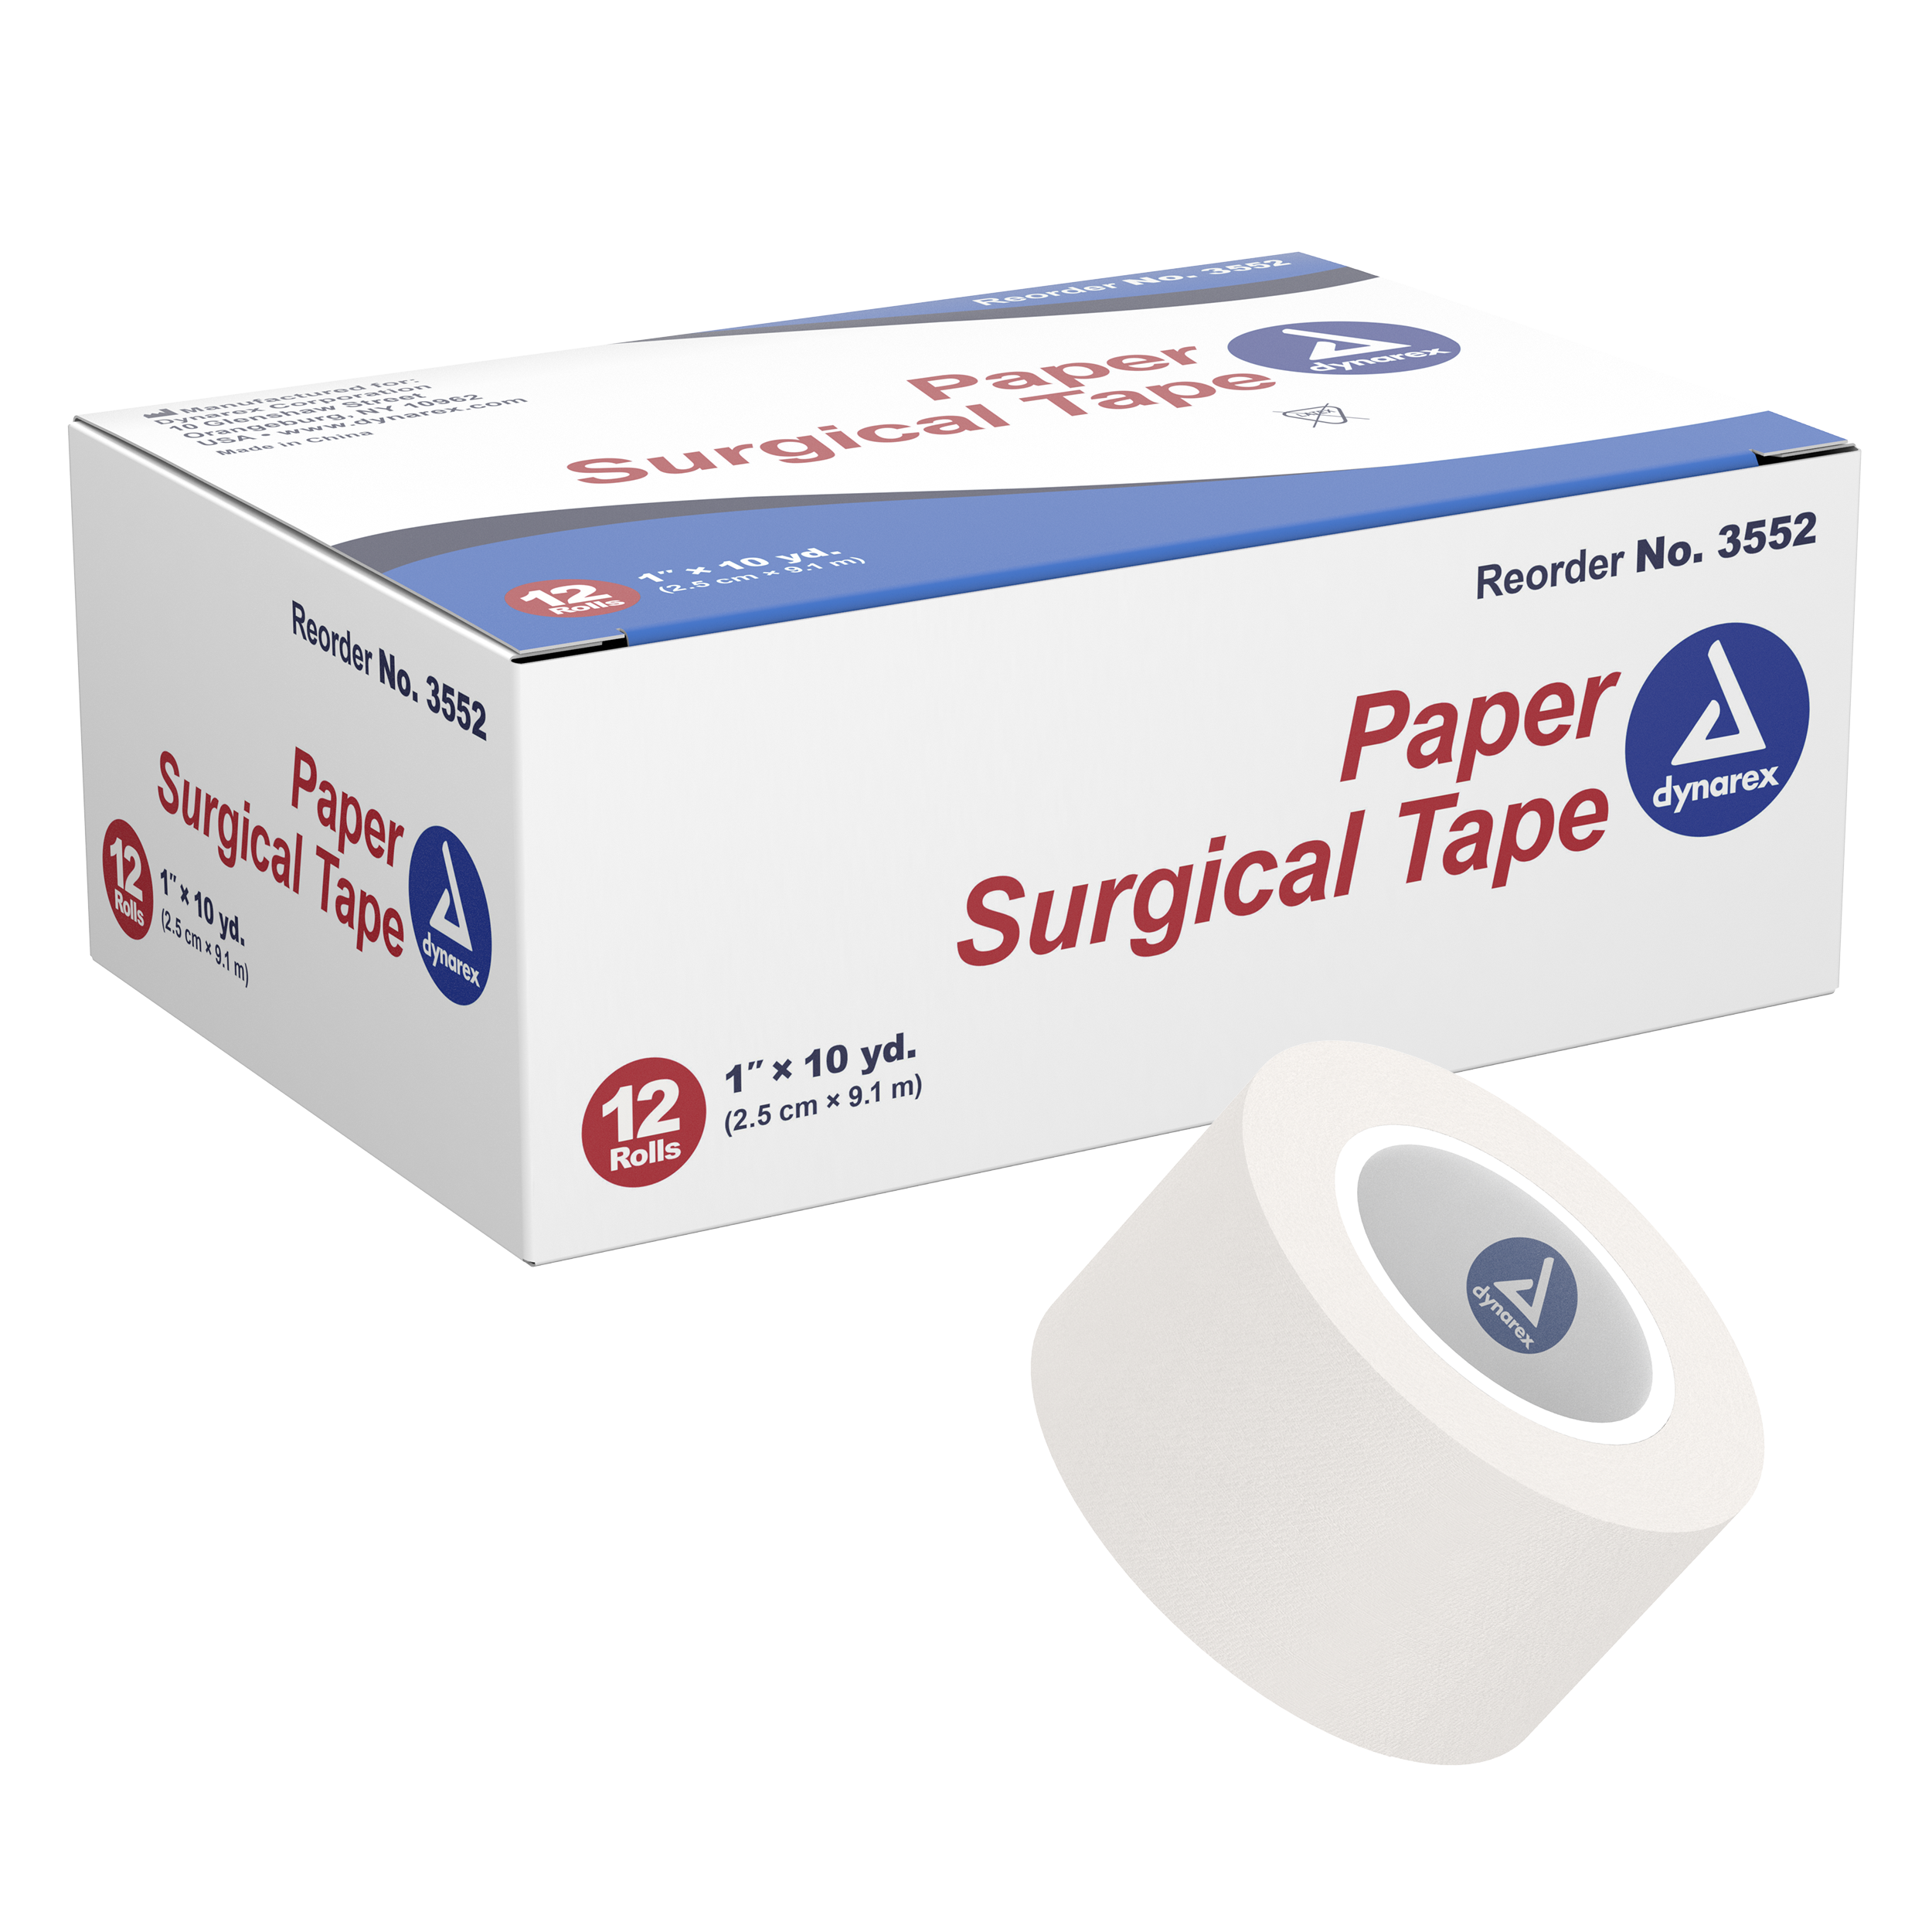 Paper Surgical Tape (1 x 10 yards)